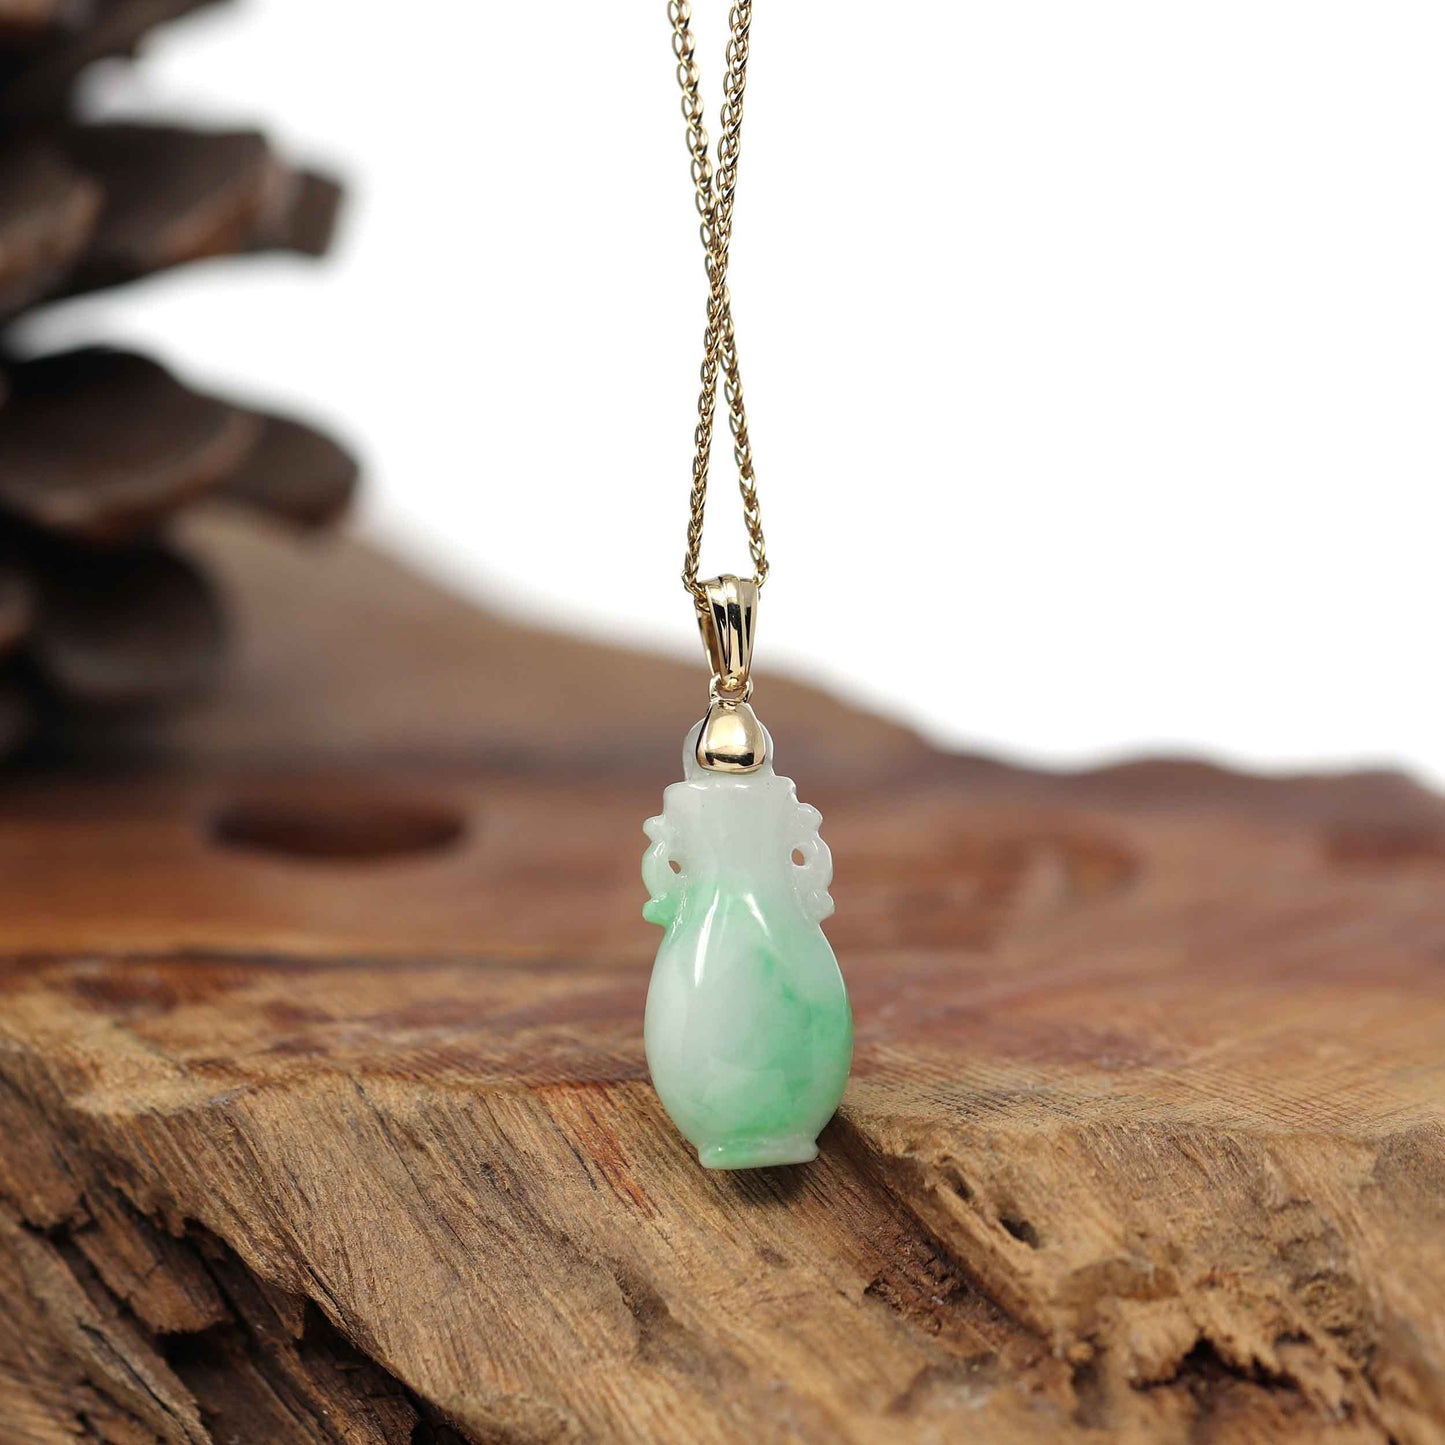 RealJade® Co. Natural Unique Jadeite Jade Lucky Bottle Necklace with 14k Yellow Gold Bail